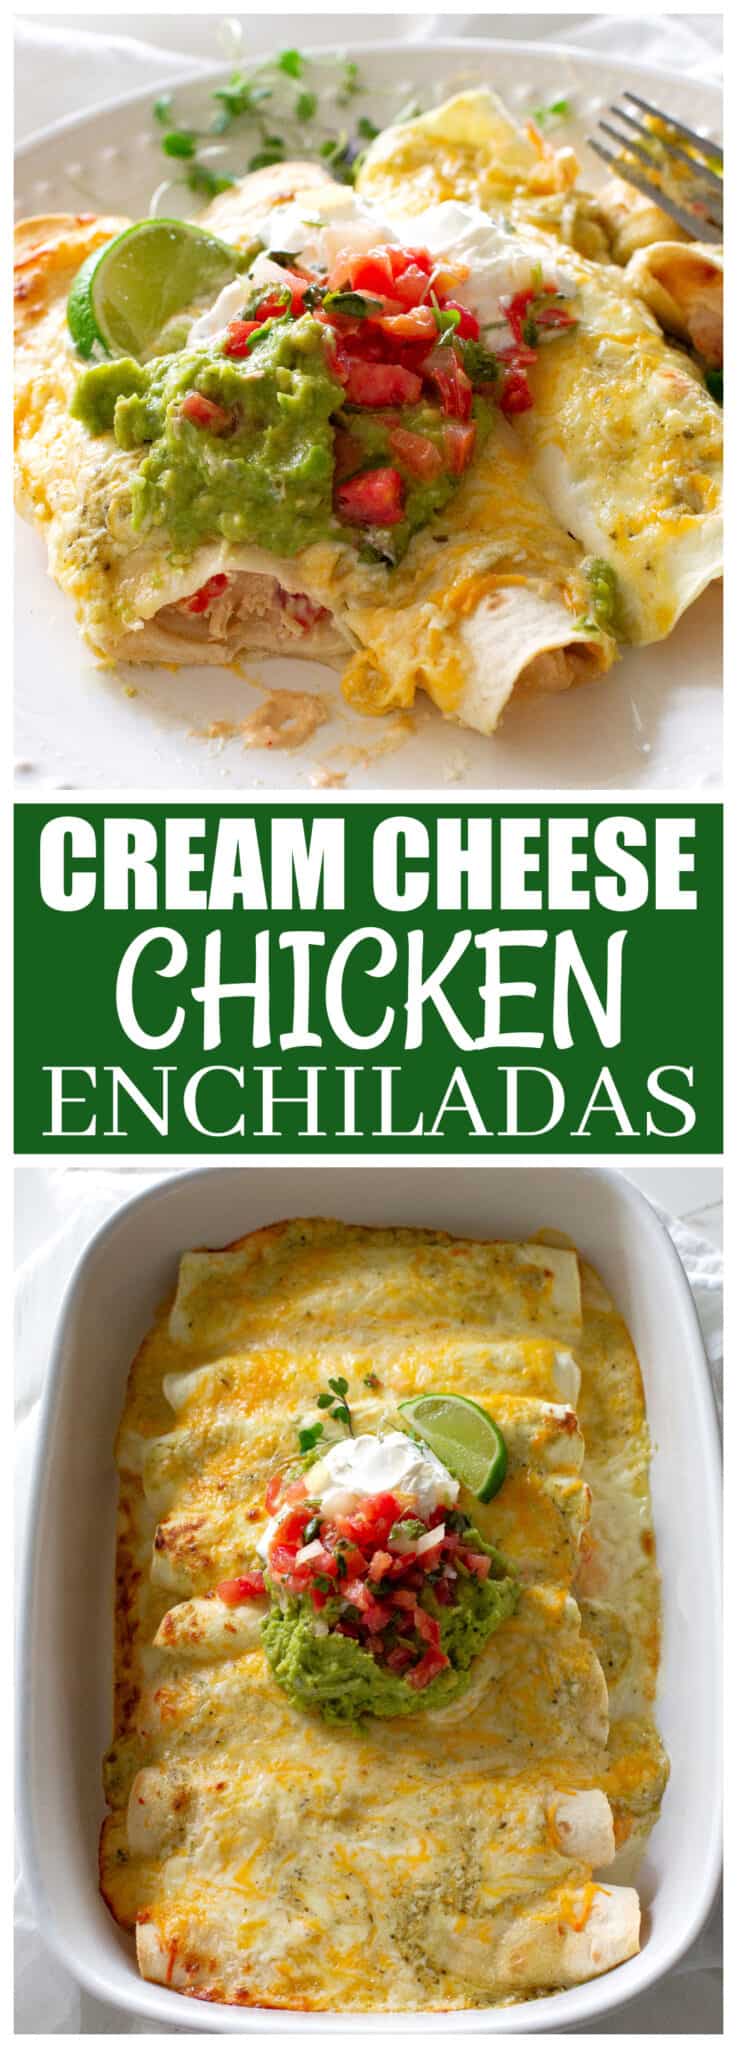 Cream Cheese Chicken Enchiladas - The Girl Who Ate Everything